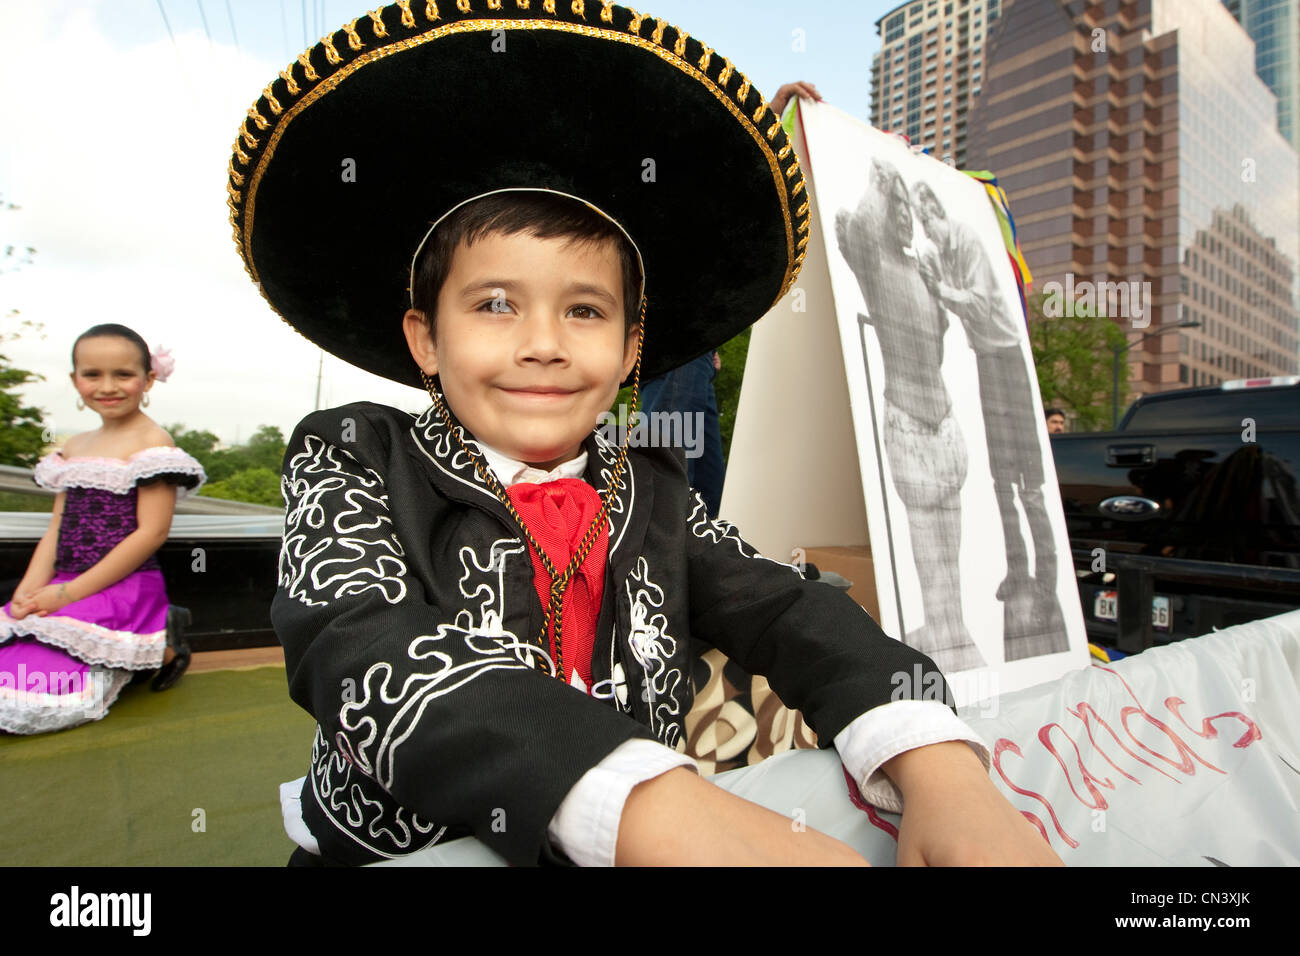 Young boy in traditional Mexican Charro attire rides on parade float in  Austin, Texas Stock Photo - Alamy